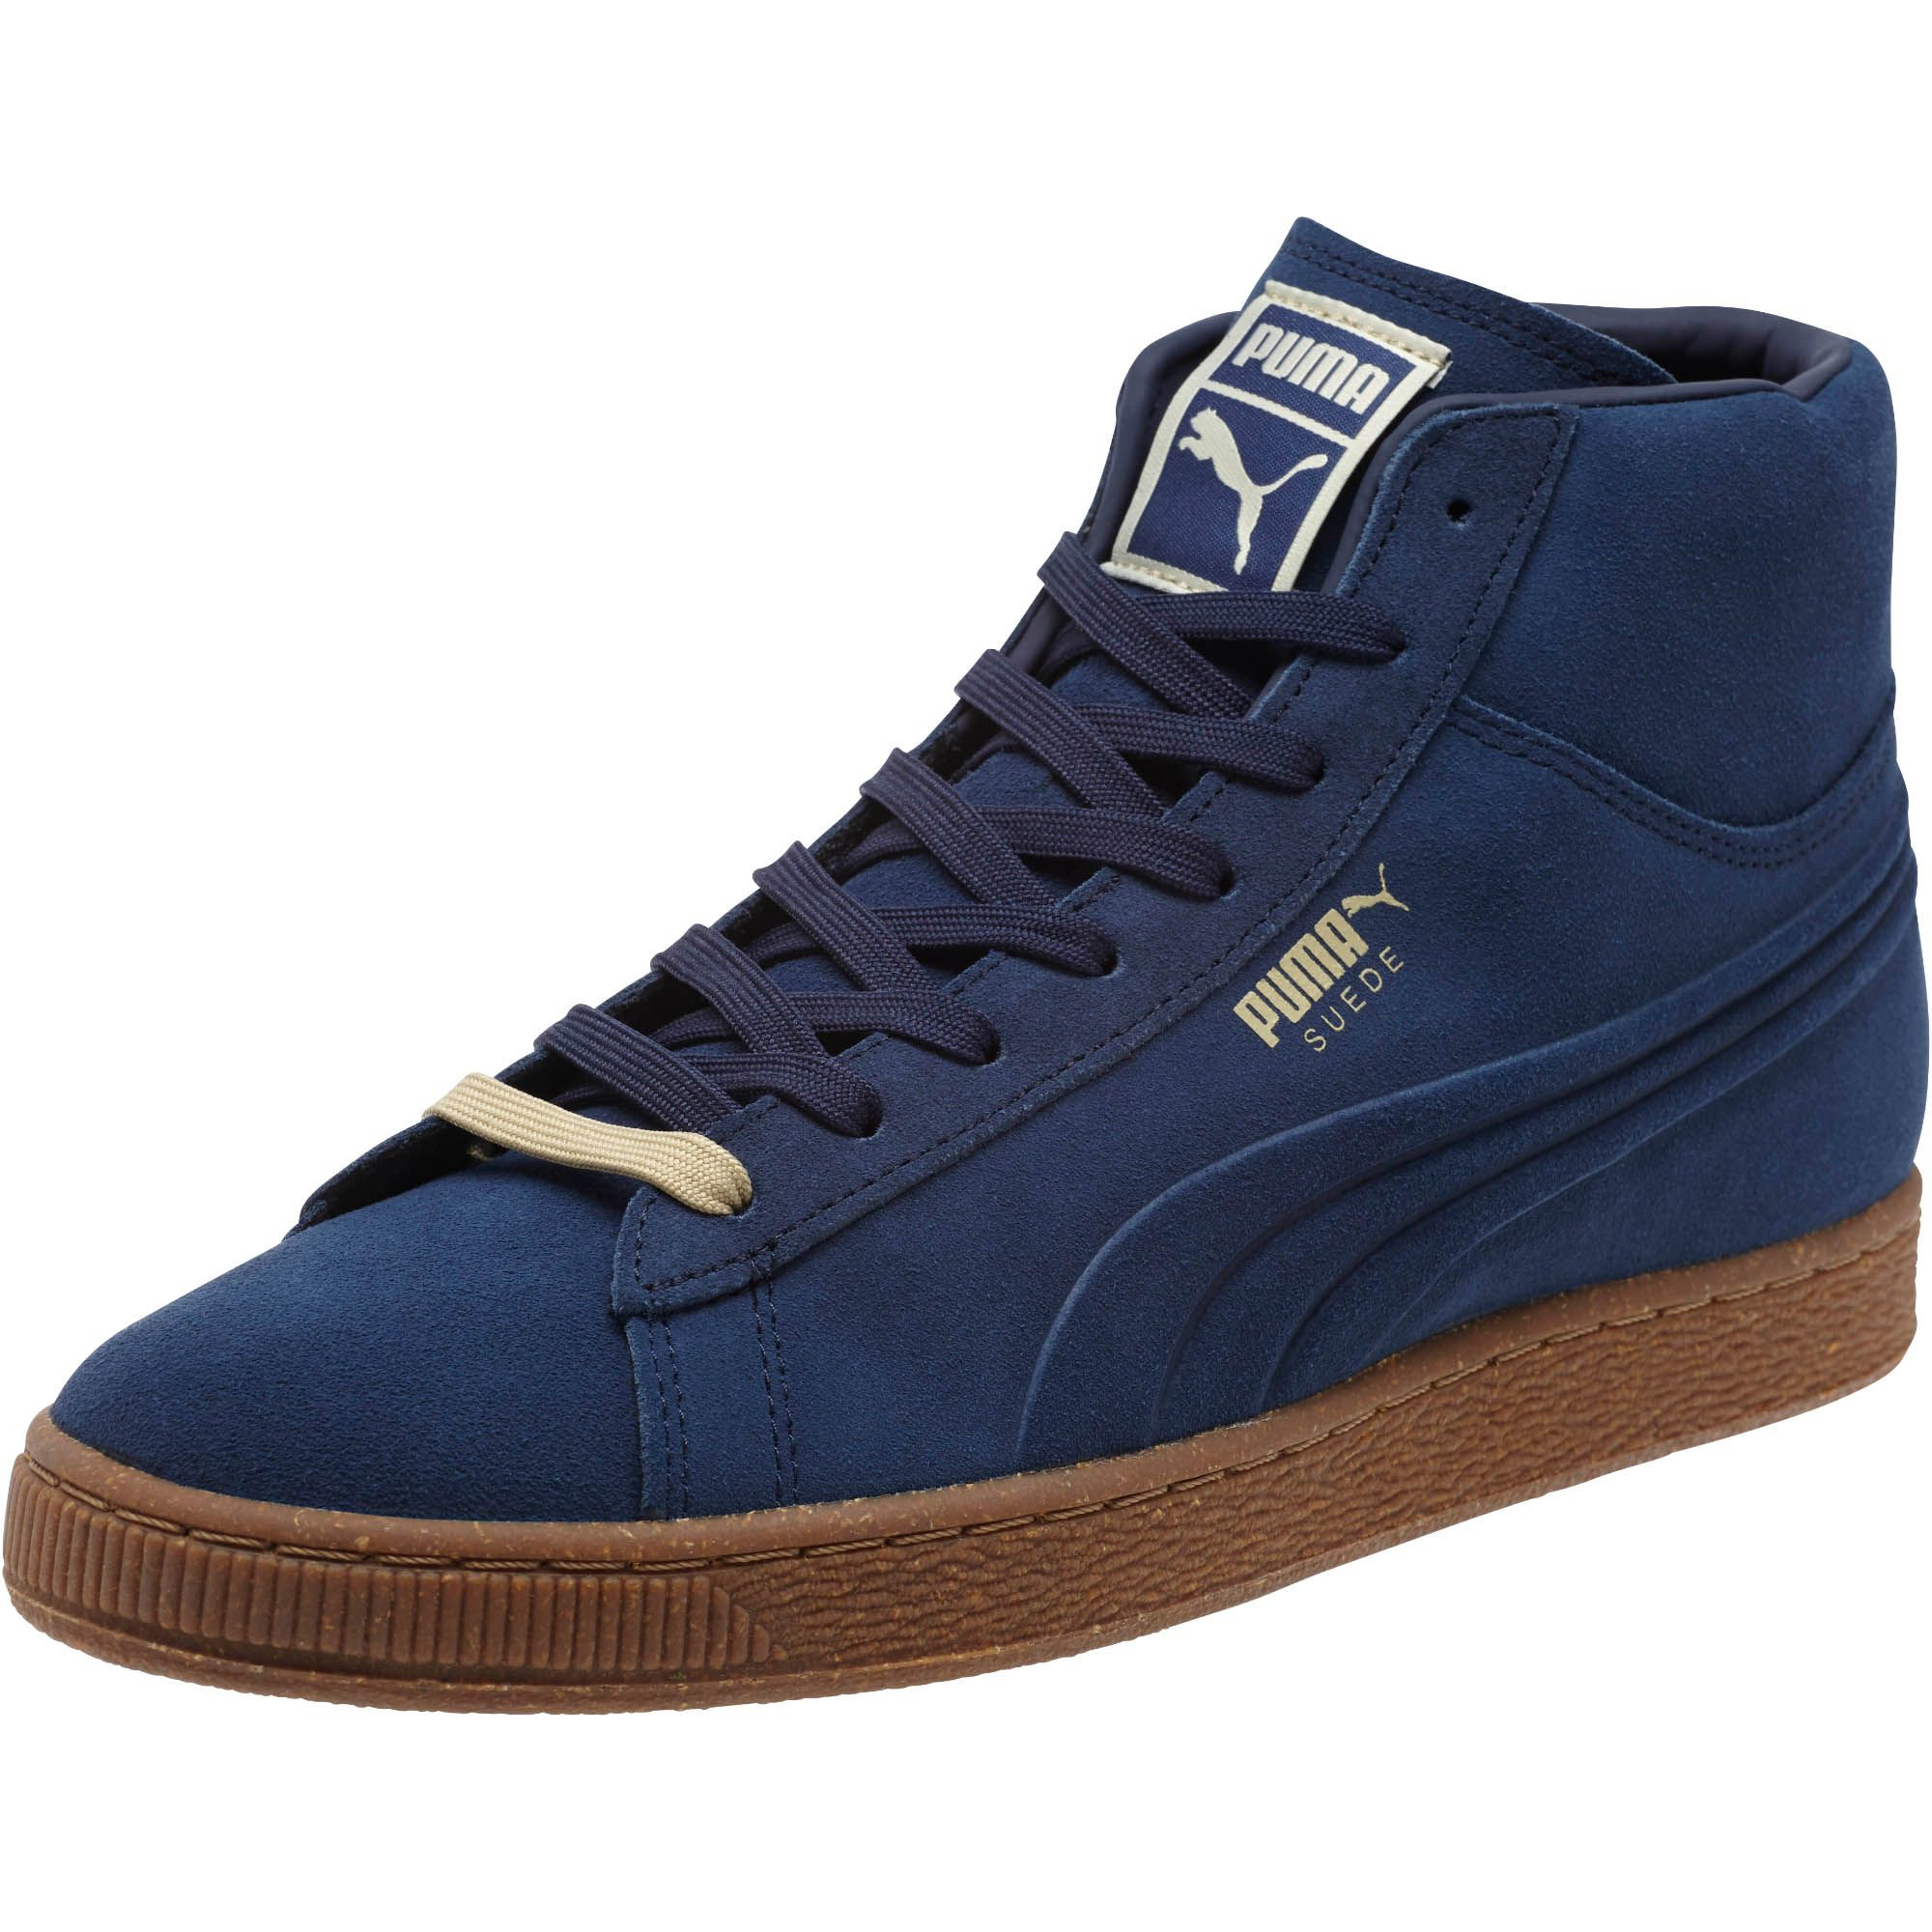 Lyst - Puma Suede Embossed Mixed Rubber Mid Men's Sneakers in Blue for Men